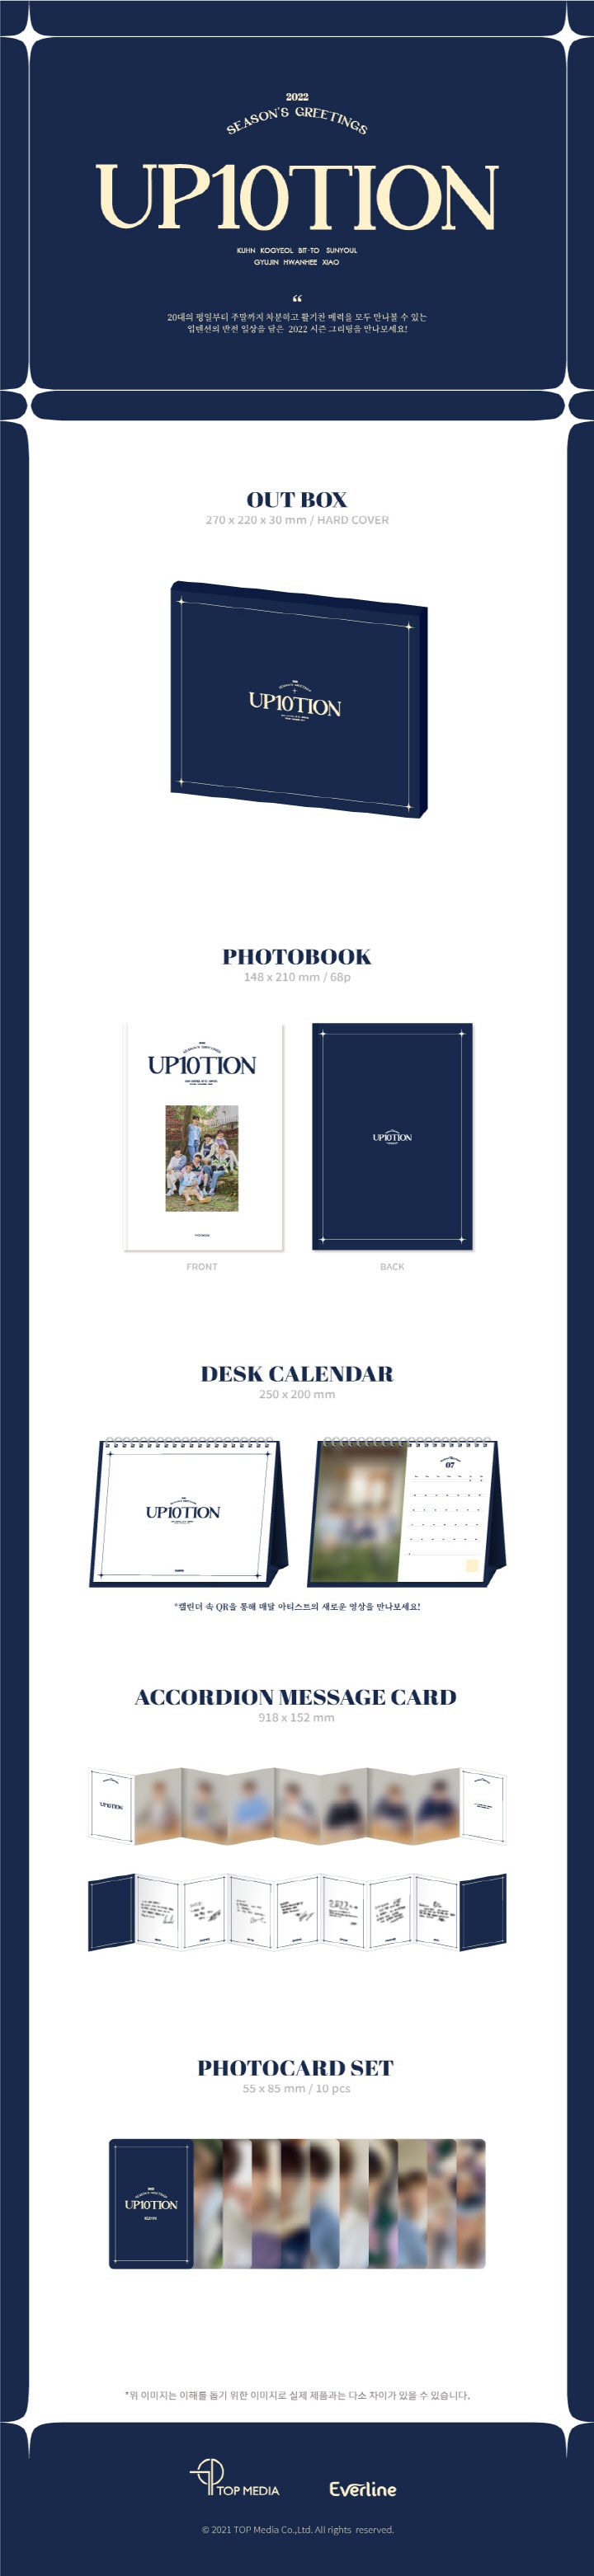 1 Photo Book (68 pages)
1 Desk Calendar
1 Accordion Message Card
1 Photo Card Set (10 cards in a set)